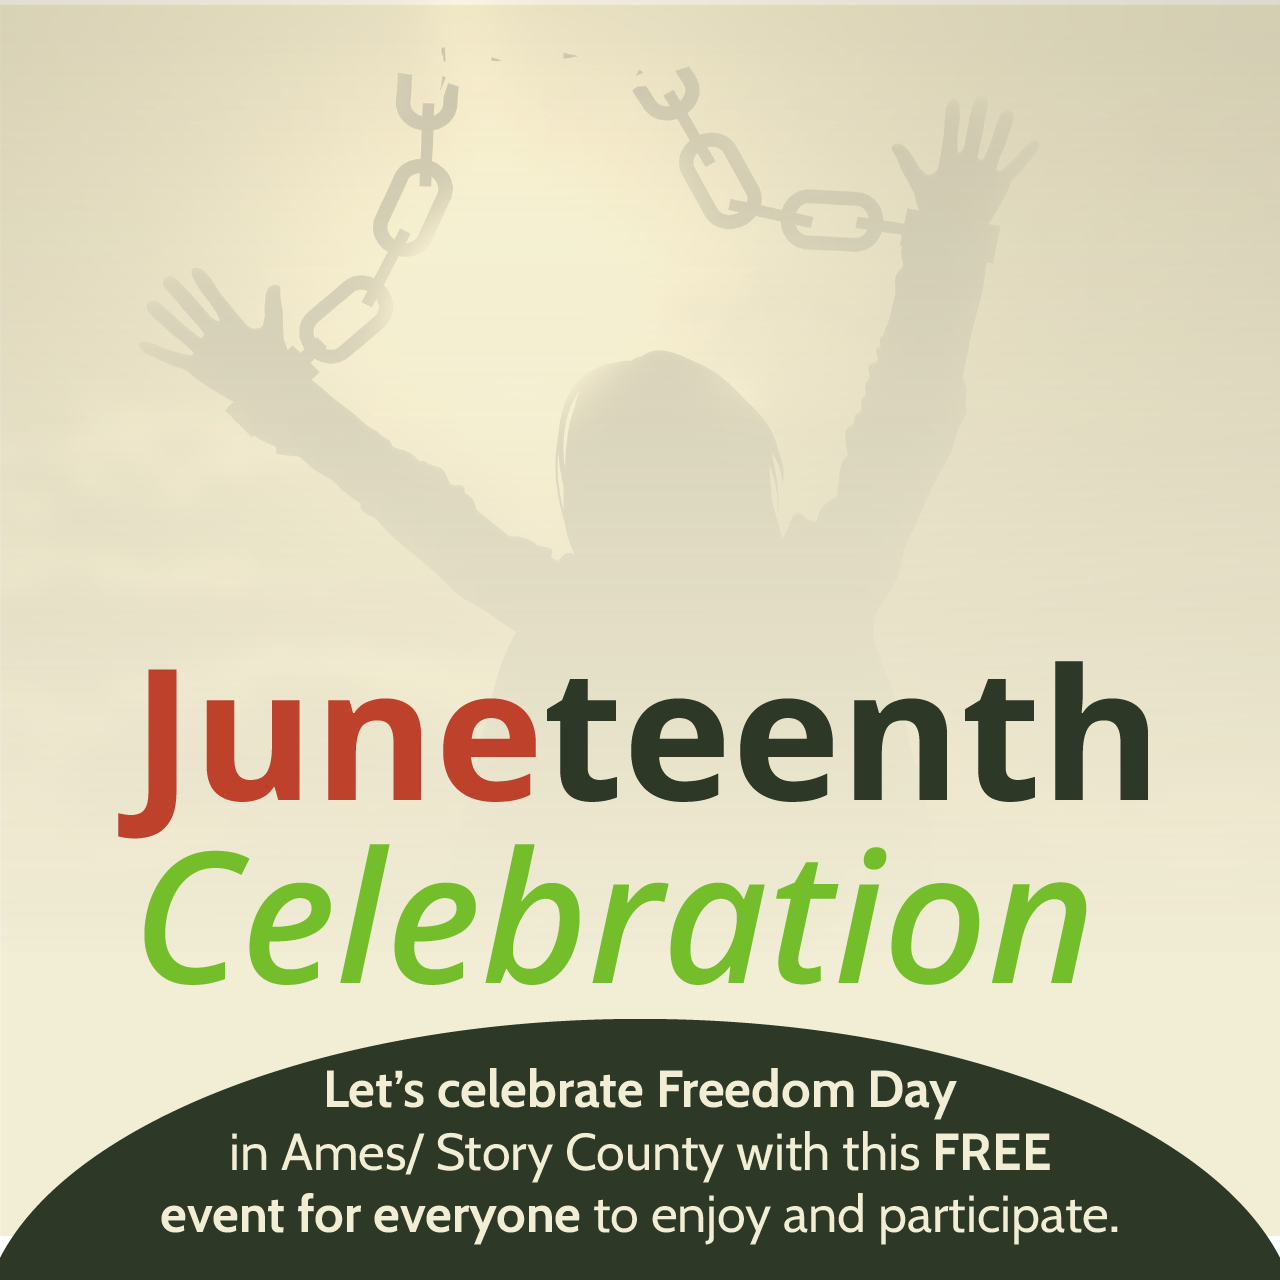 Juneteenth Celebration. Let's celebrate Freedom Day in Ames/Story County with this FREE event for everyone to enjoy and participate.